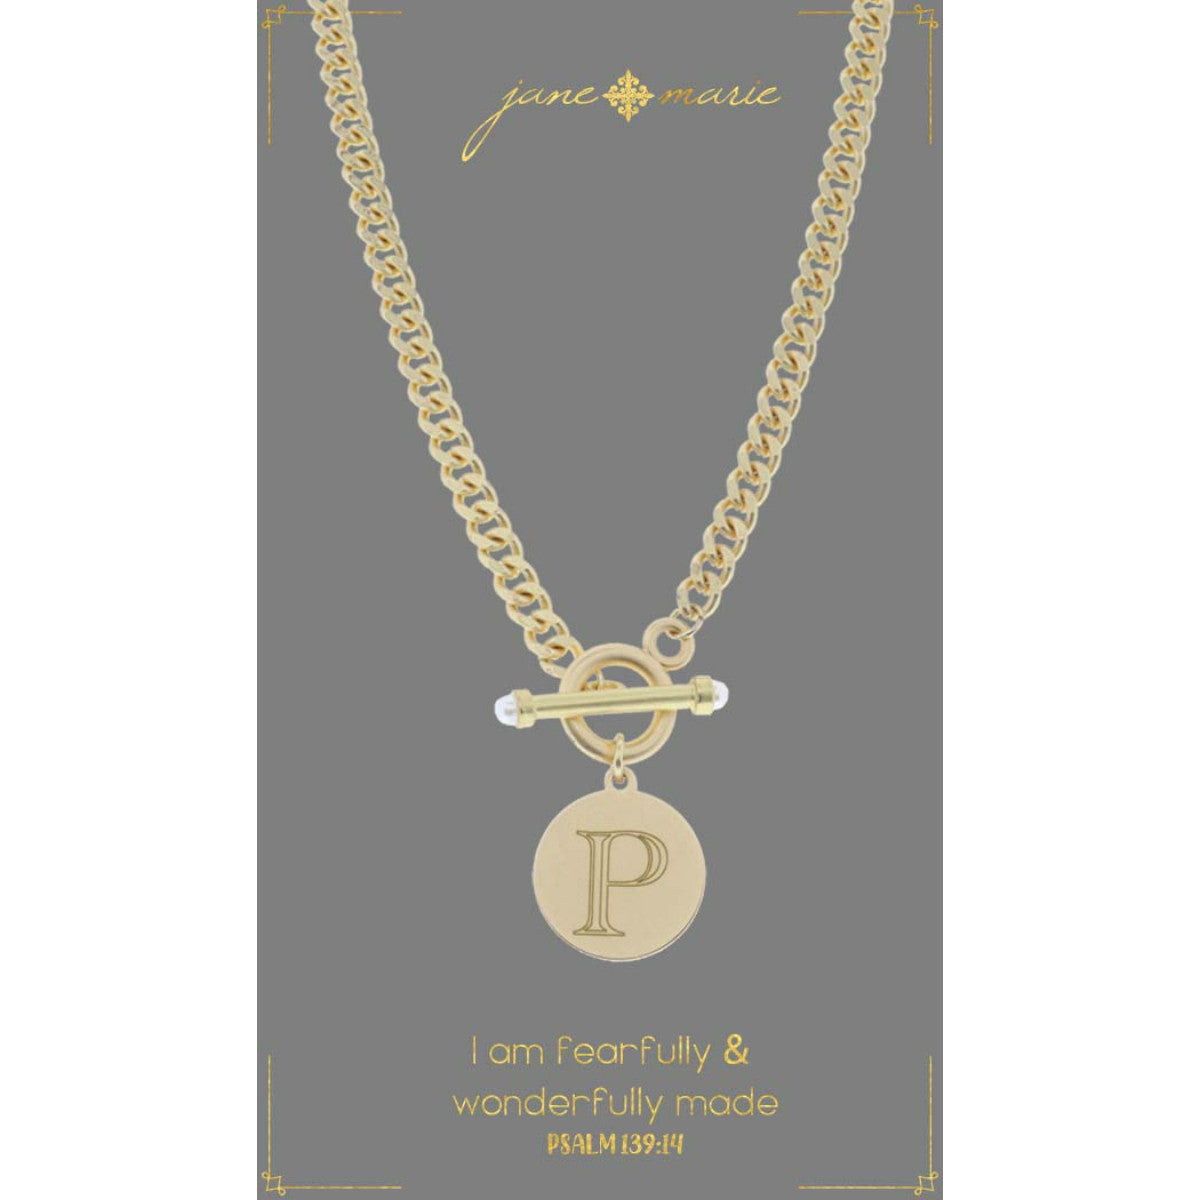 "p" stamped letter necklace on a gray display card on a white background